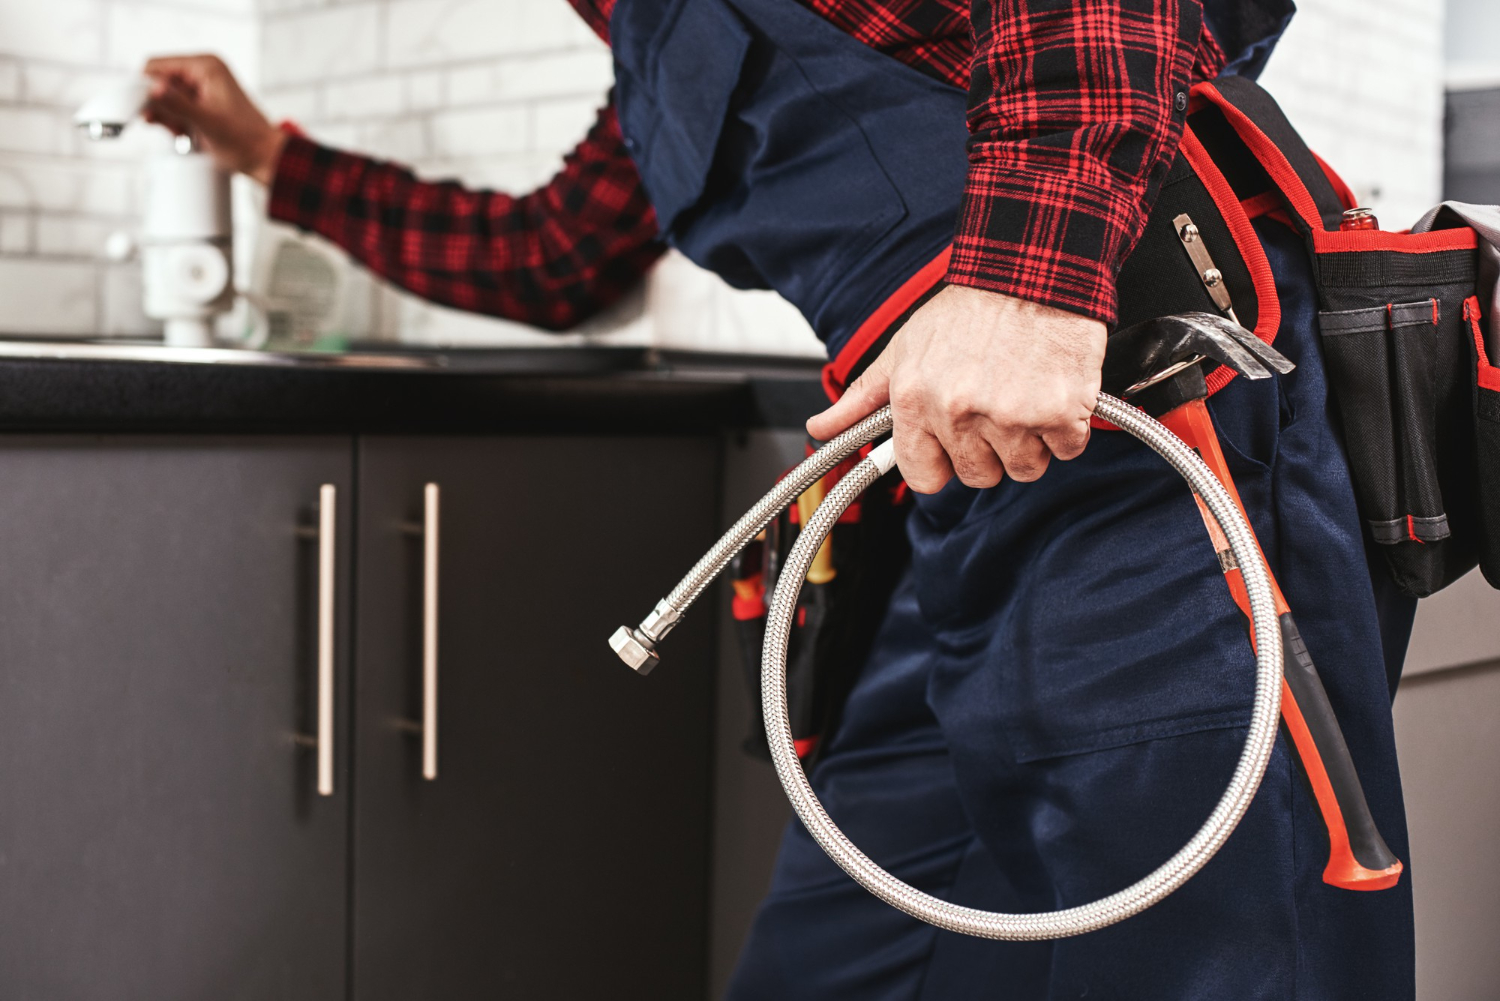 Find expert plumbers near you with these essential tips and tricks - Proficient Plumbing Solution